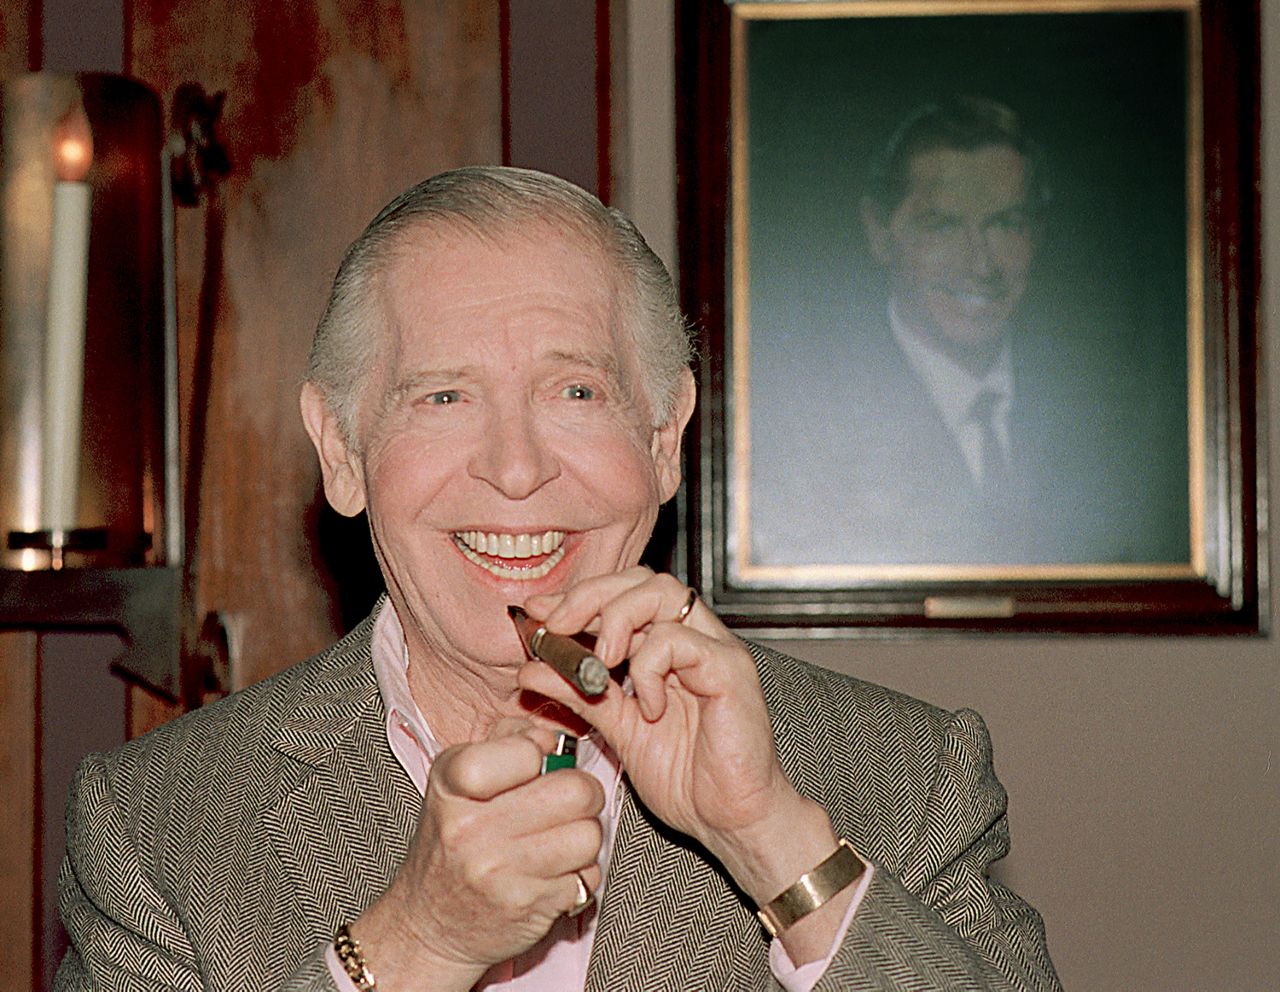 Milton Berle laughs as he lights a cigar during a luncheon at the Friars Club in Beverly Hills, Ca., Monday, July 11, 1988. Berle will celebrate his 80th birthday on July 12. At right is a portrait of Berle in his younger years. (AP Photo/Lennox Mclendon)